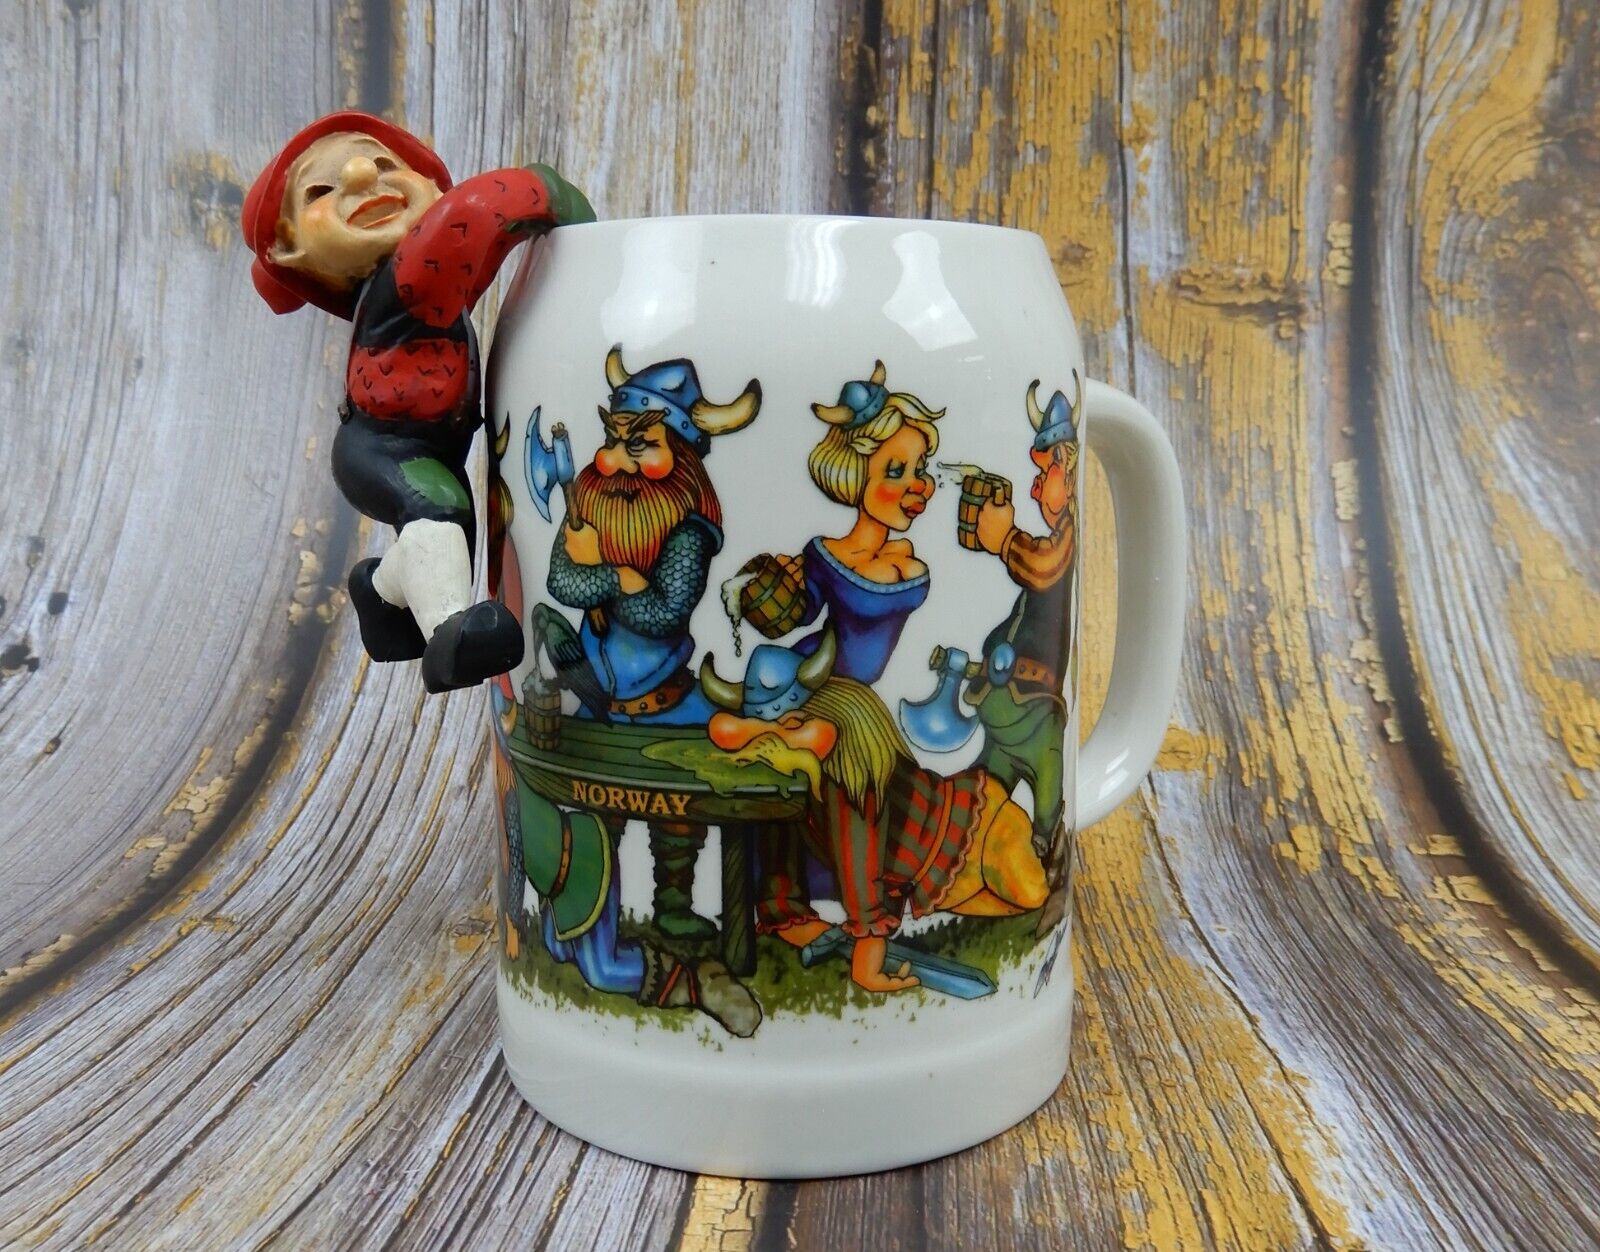 Viking Party Norway Ceramic Beer Stain with Elf Figurine